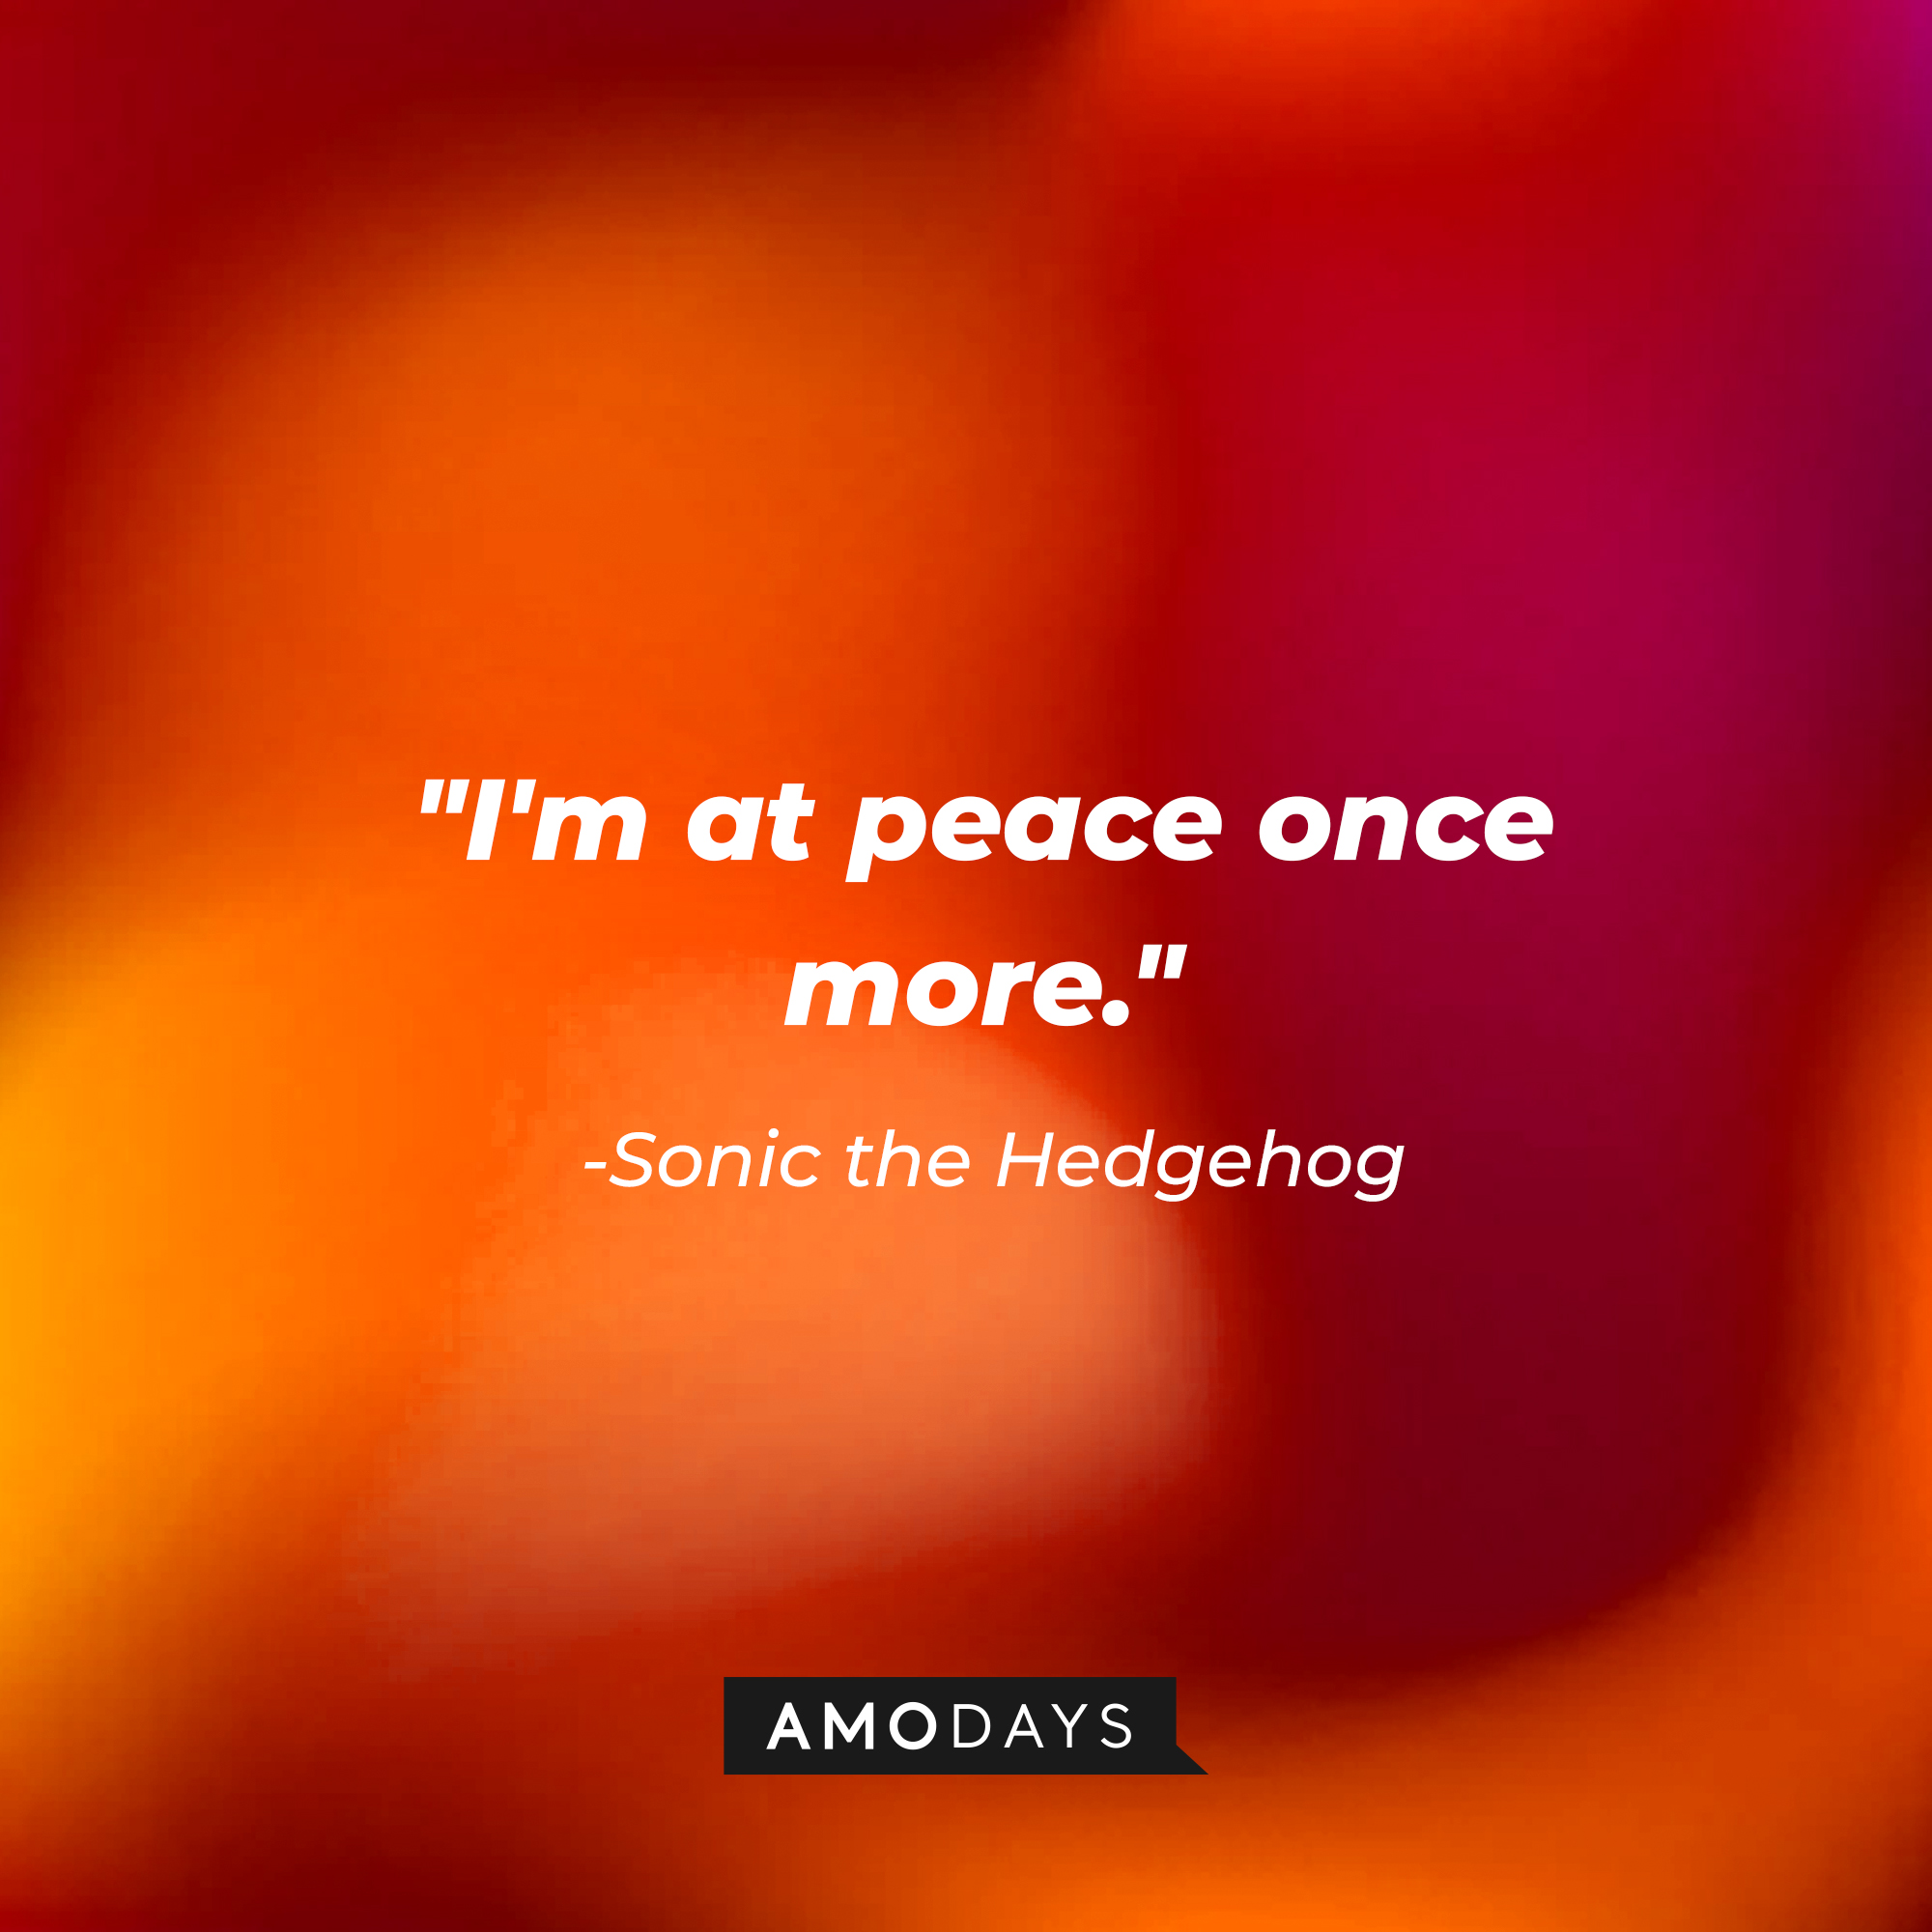 Sonic's quote: "I'm at peace once more." | Source: Amodays